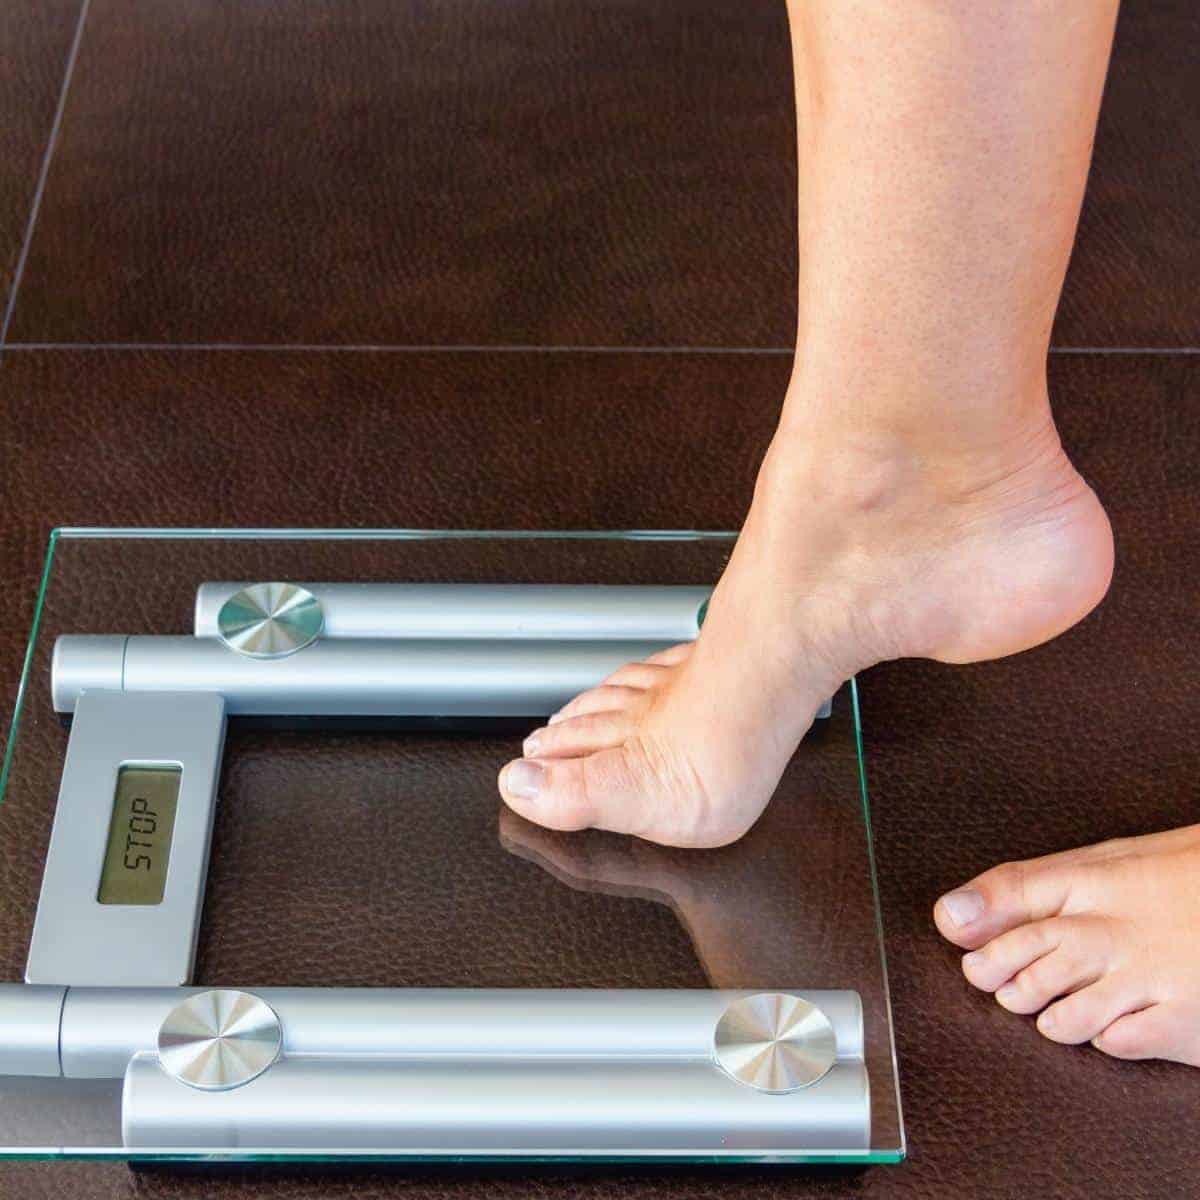 8 non scale ways to track your weight loss